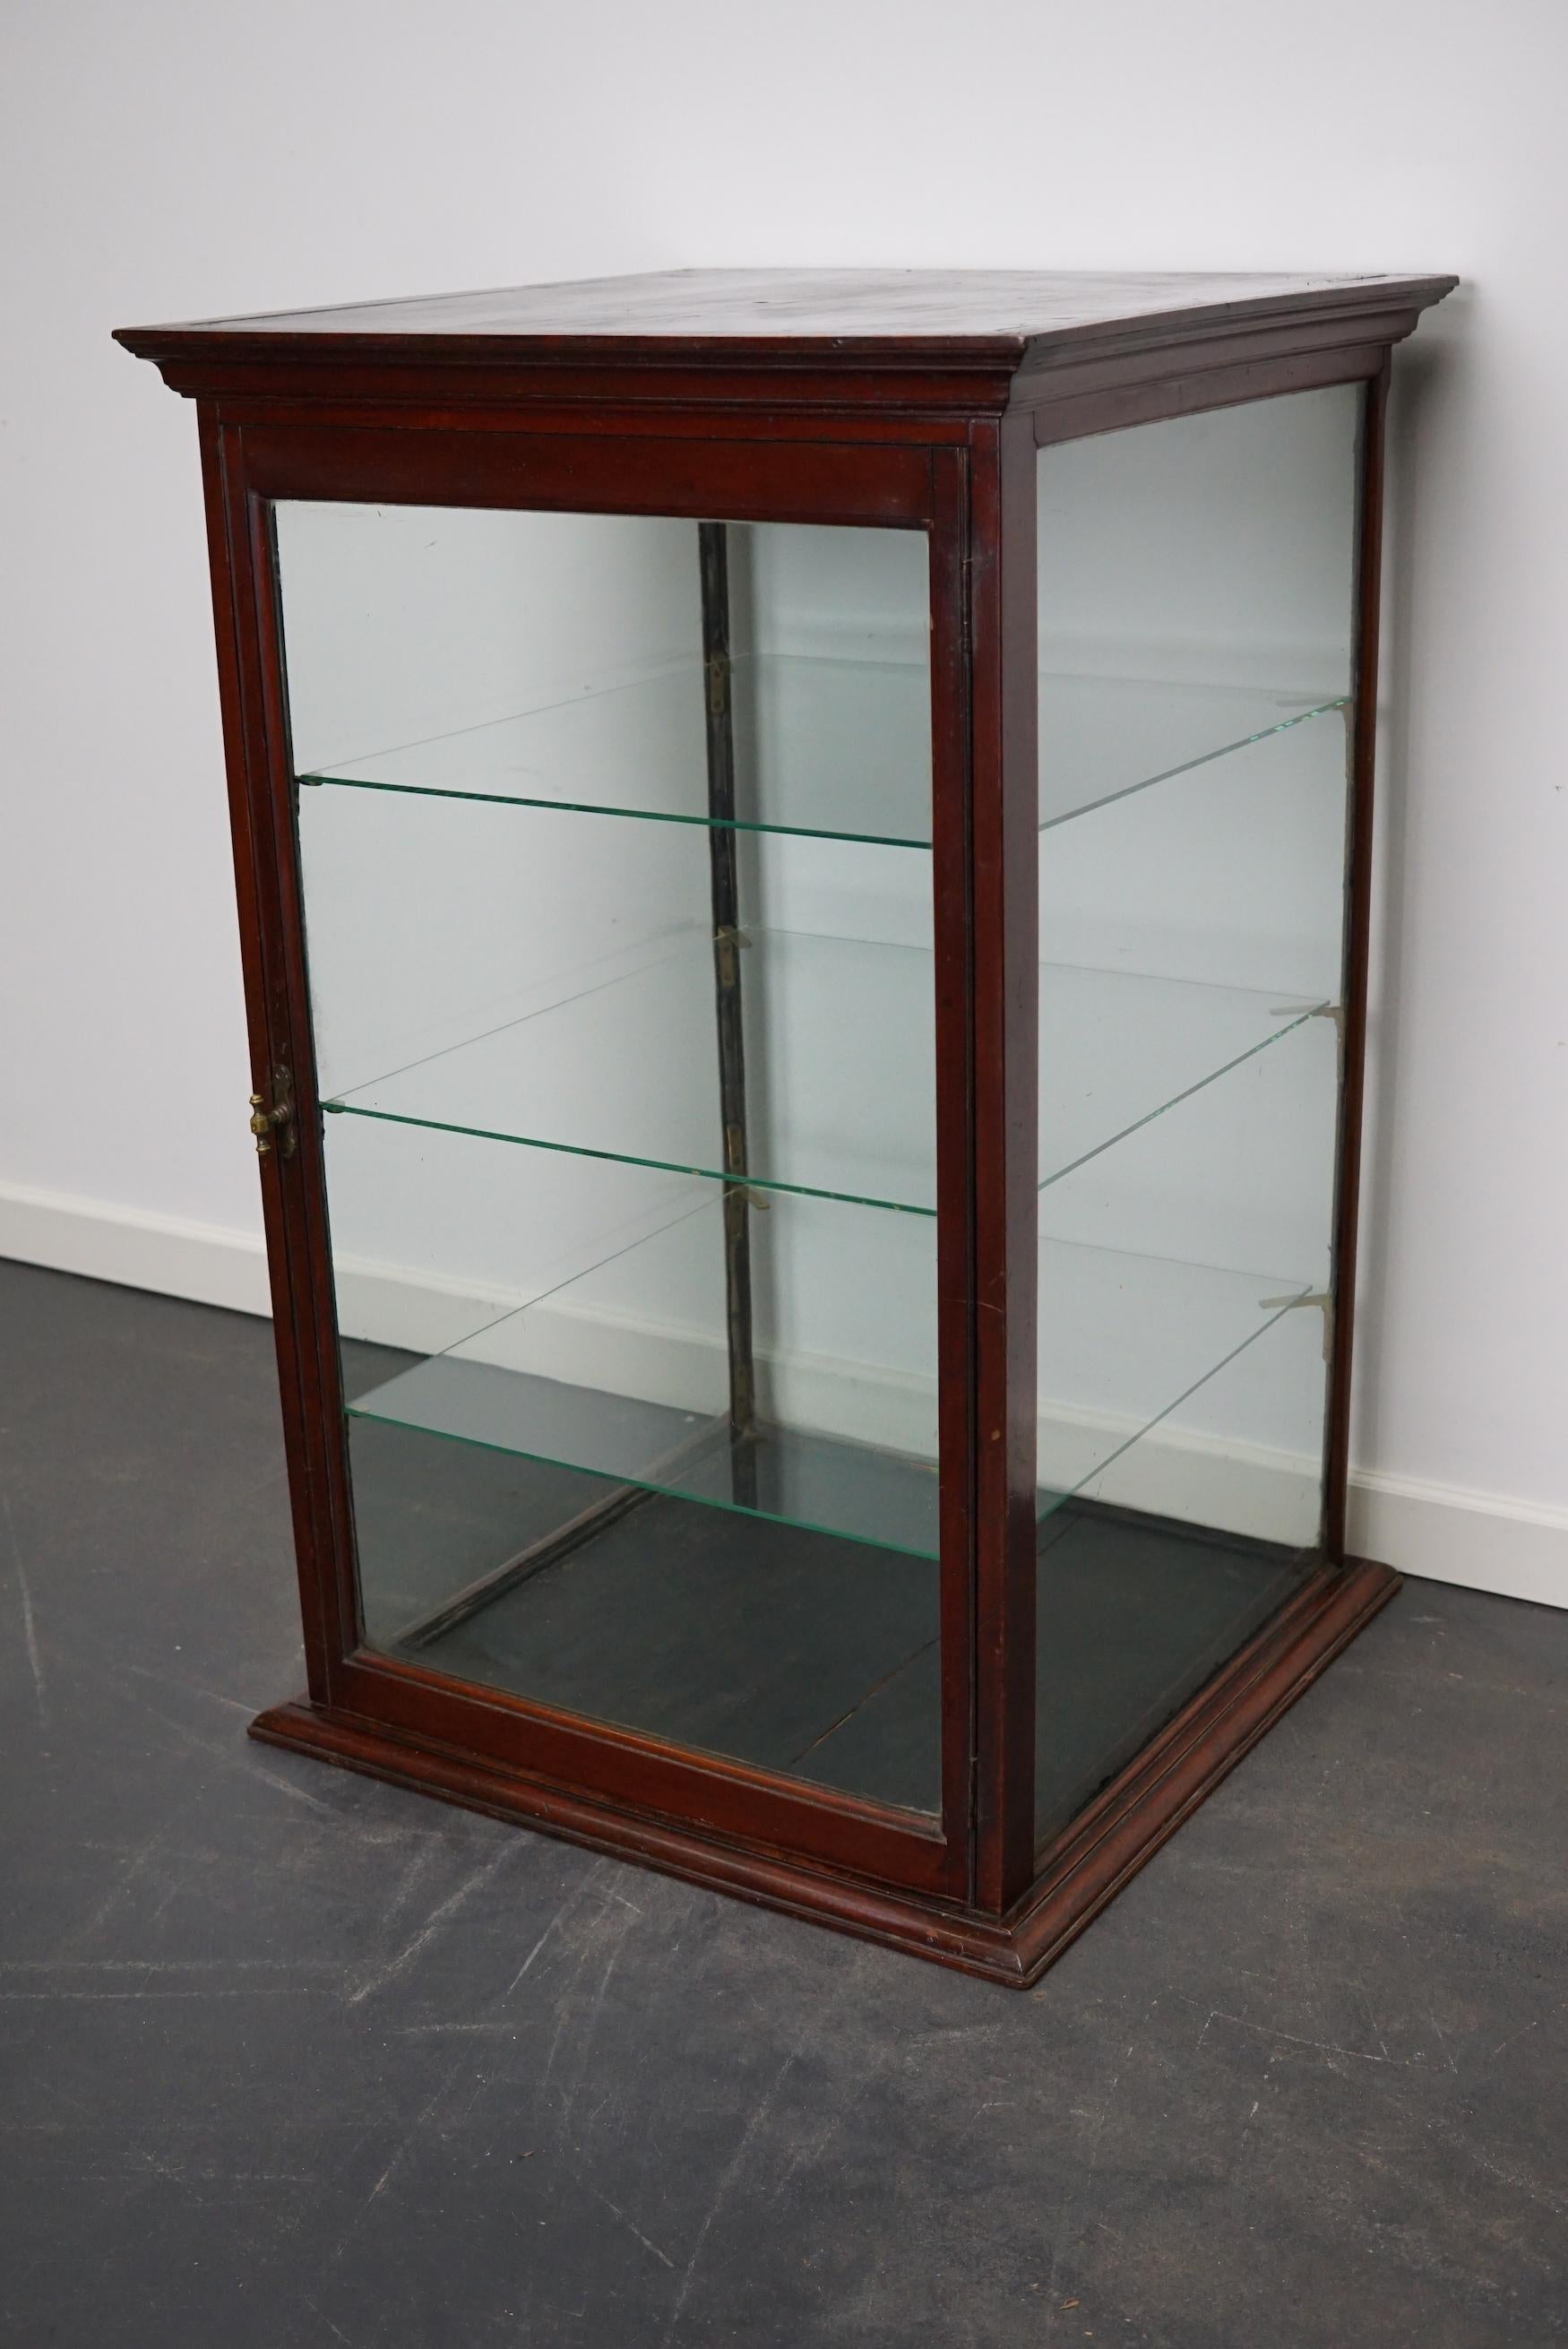 A museum quality Victorian mahogany display cabinet. This outstanding cabinet has a glass door fitted with the original knob handle. It features three shelves on cast brass shelve holders.